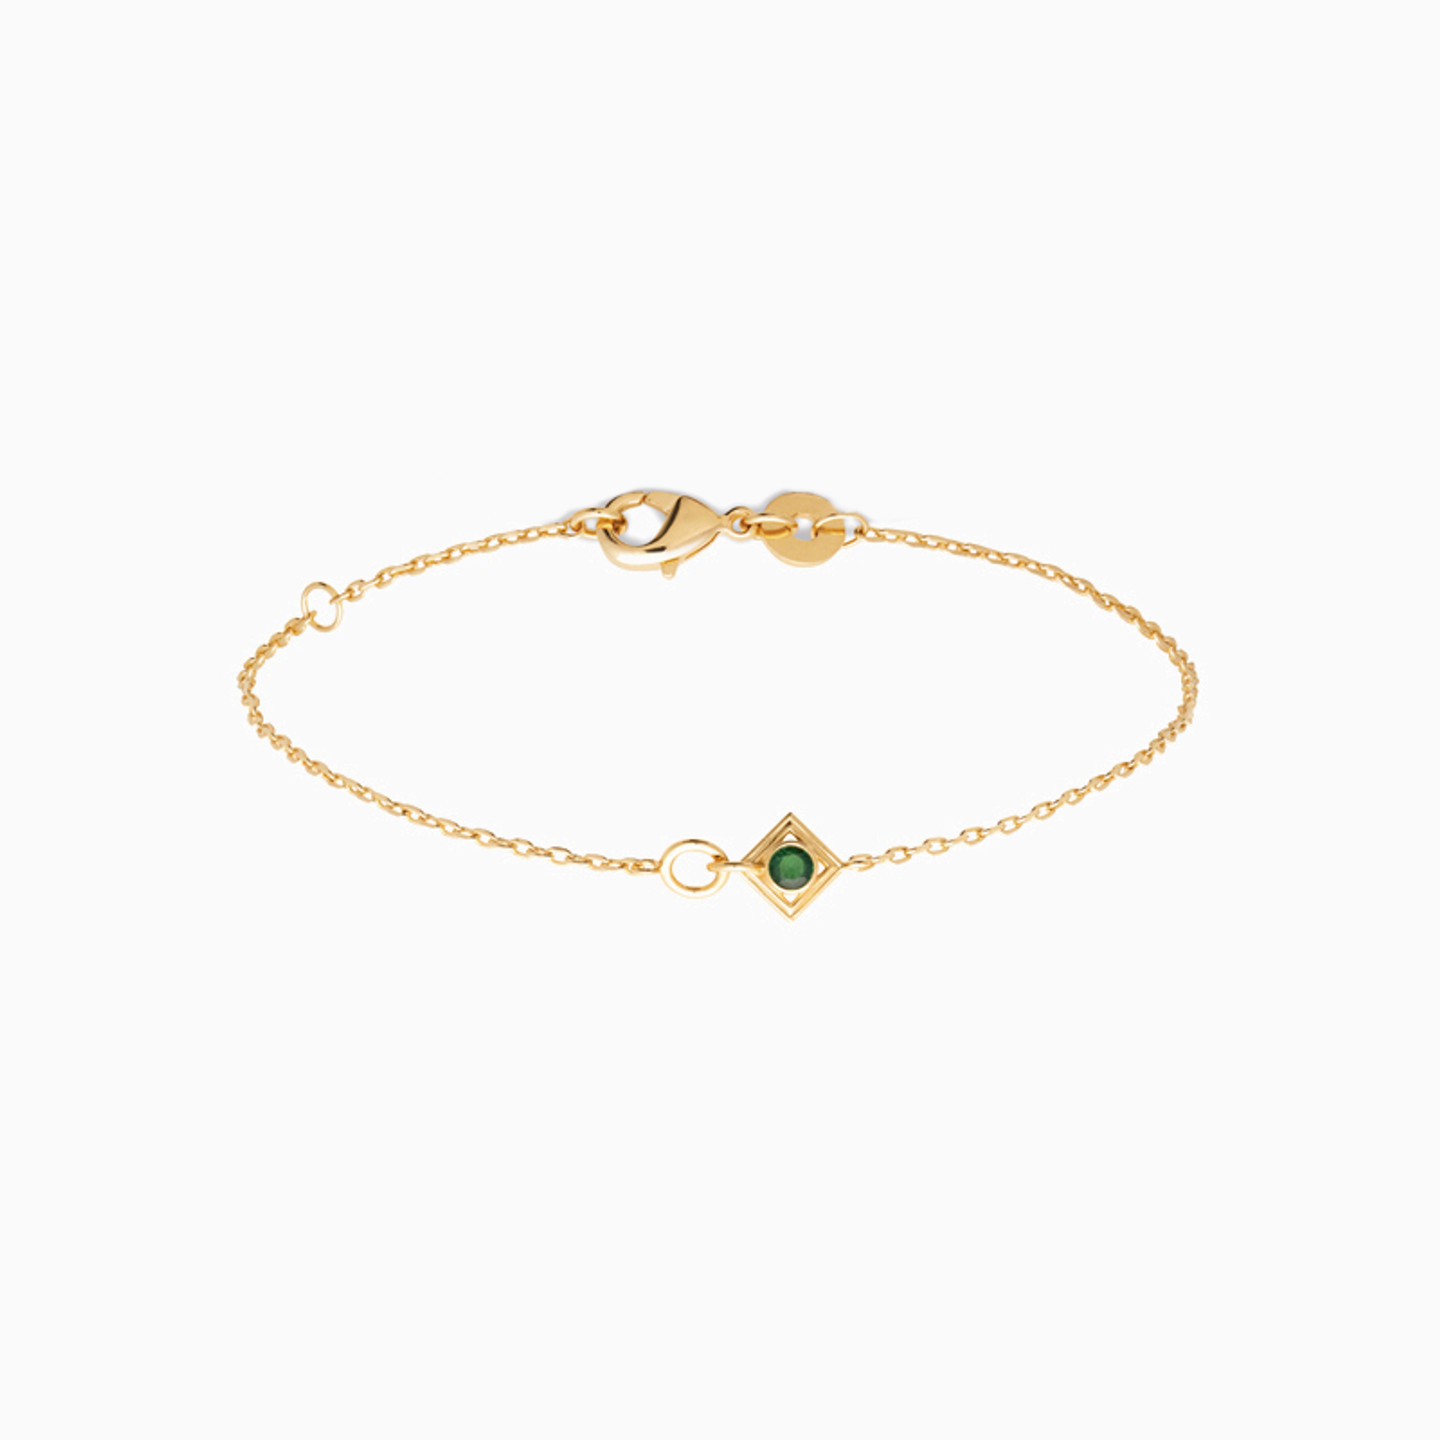 Gold Plated Colored Stones Chain Bracelet